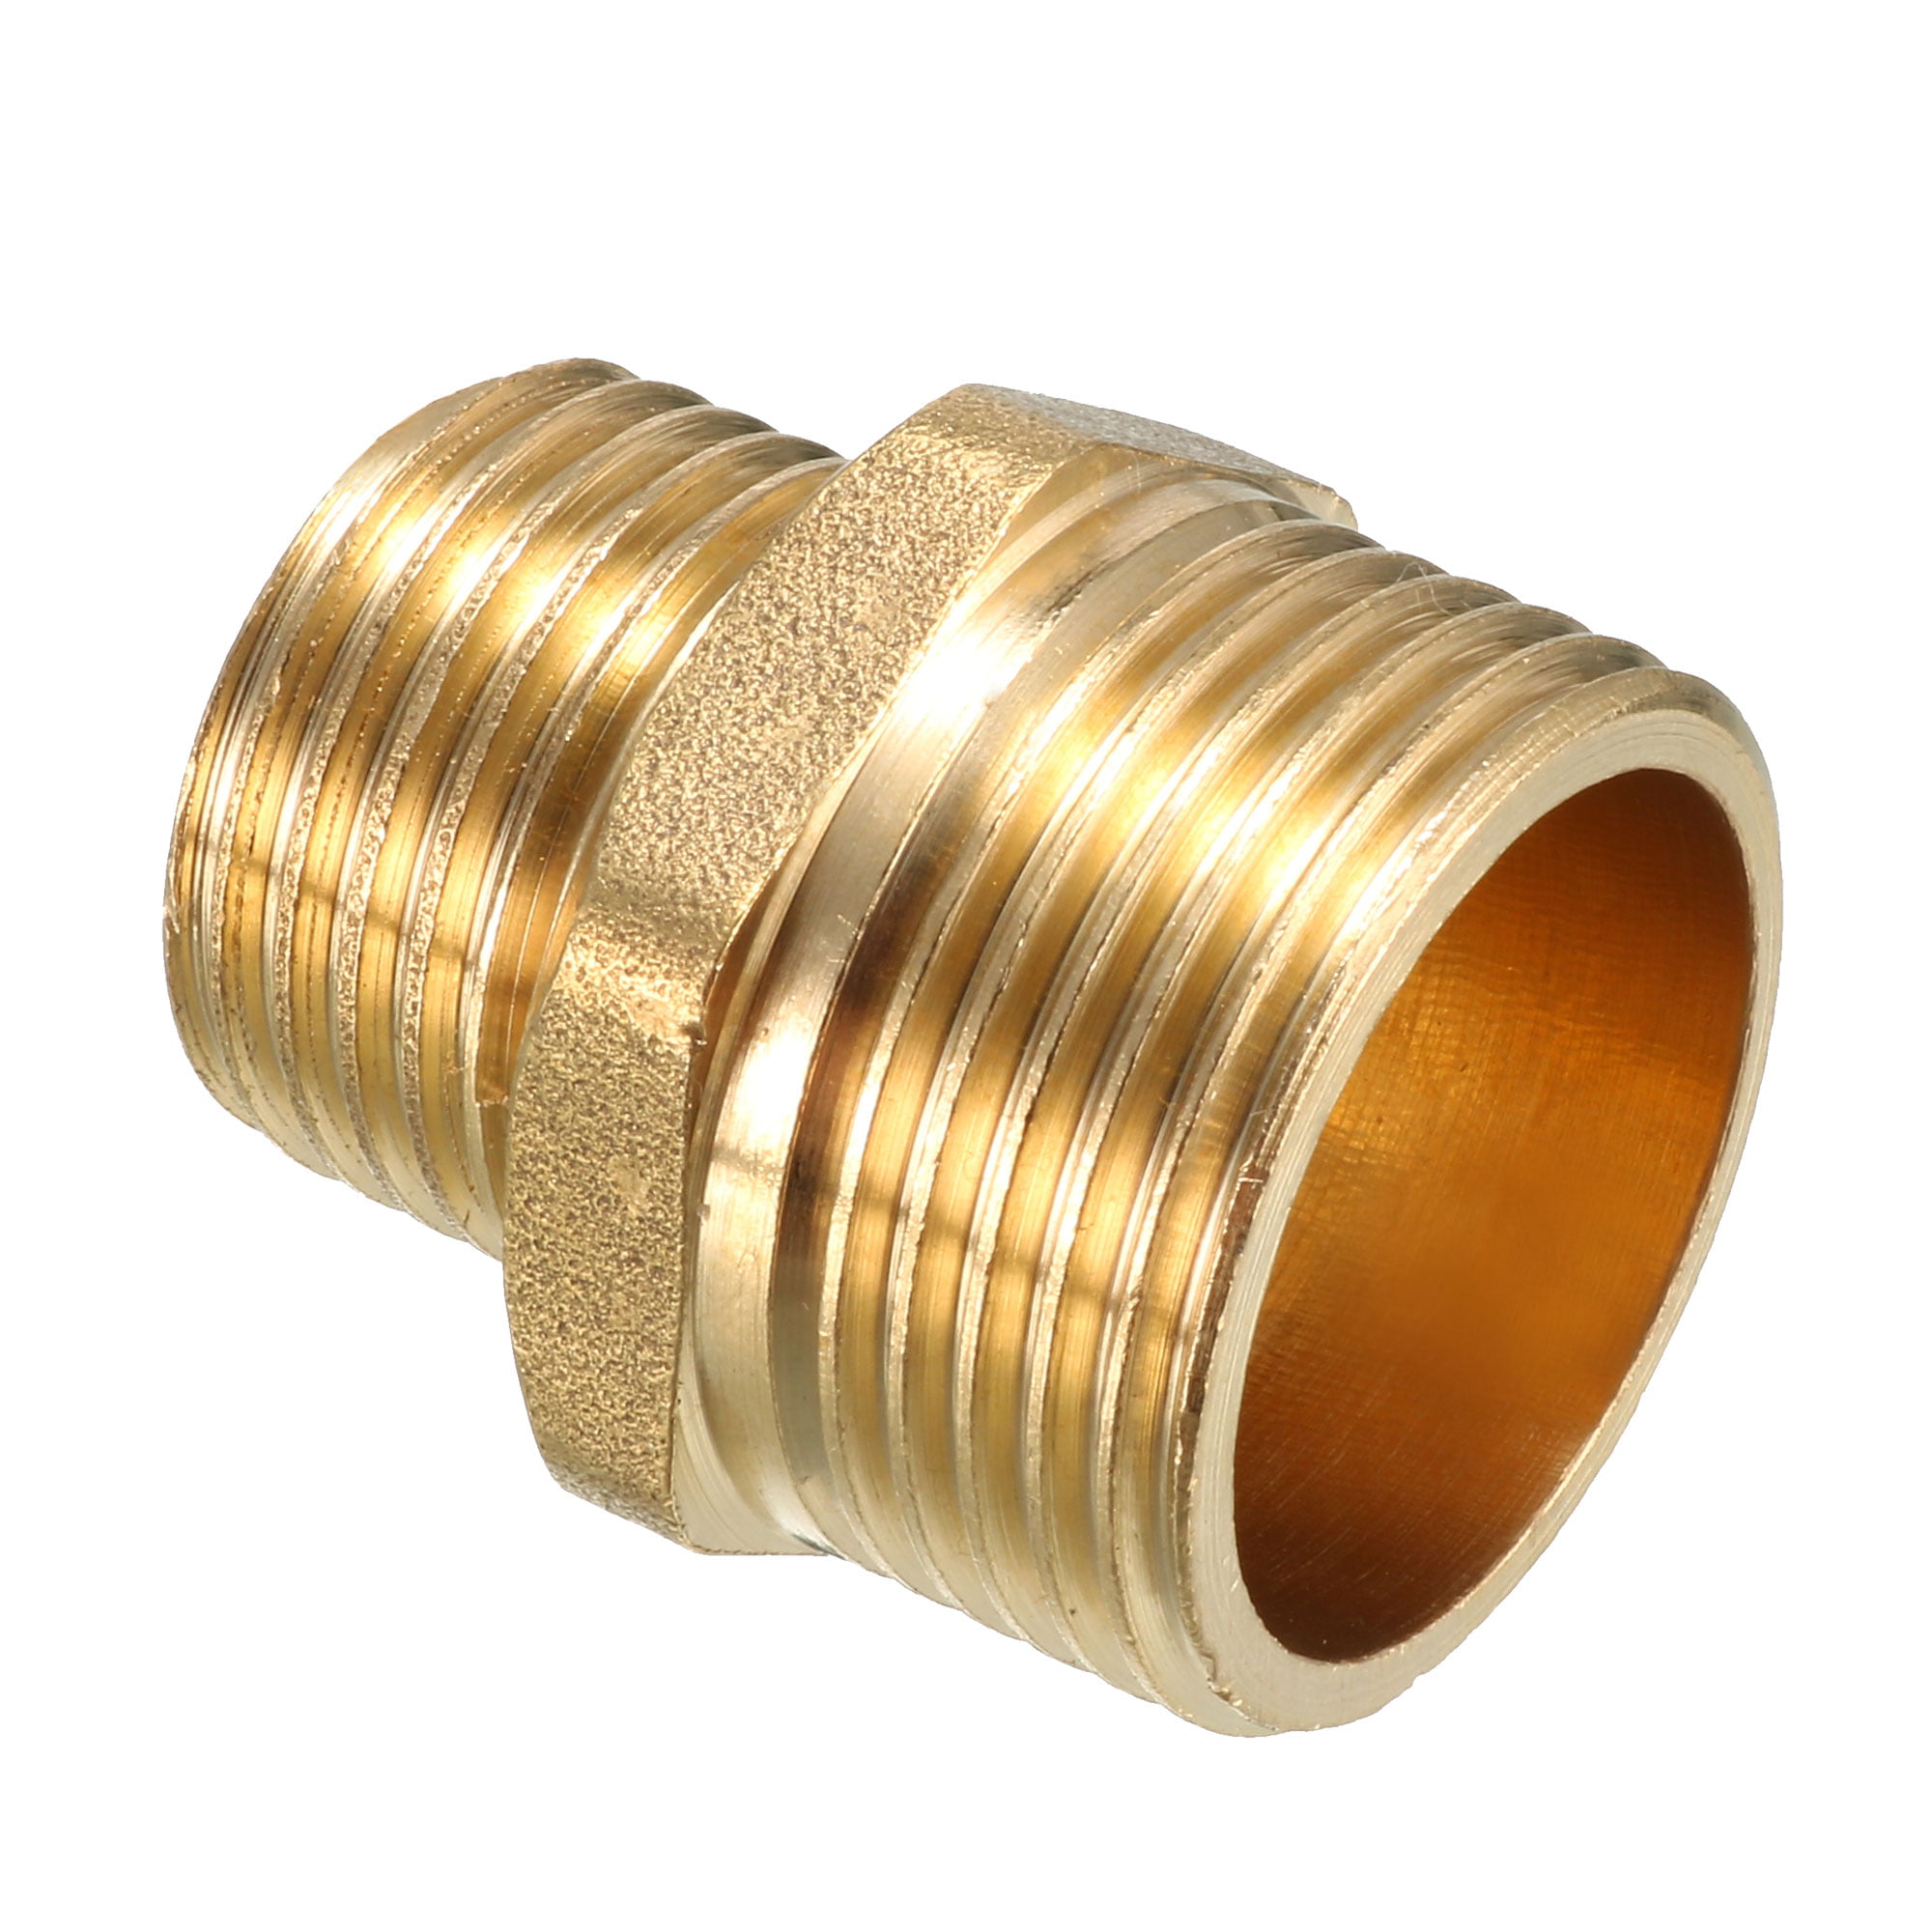 Brass BSP Male to Female Threaded Pipe Reducer Nipple Pipe Fittings Connector 